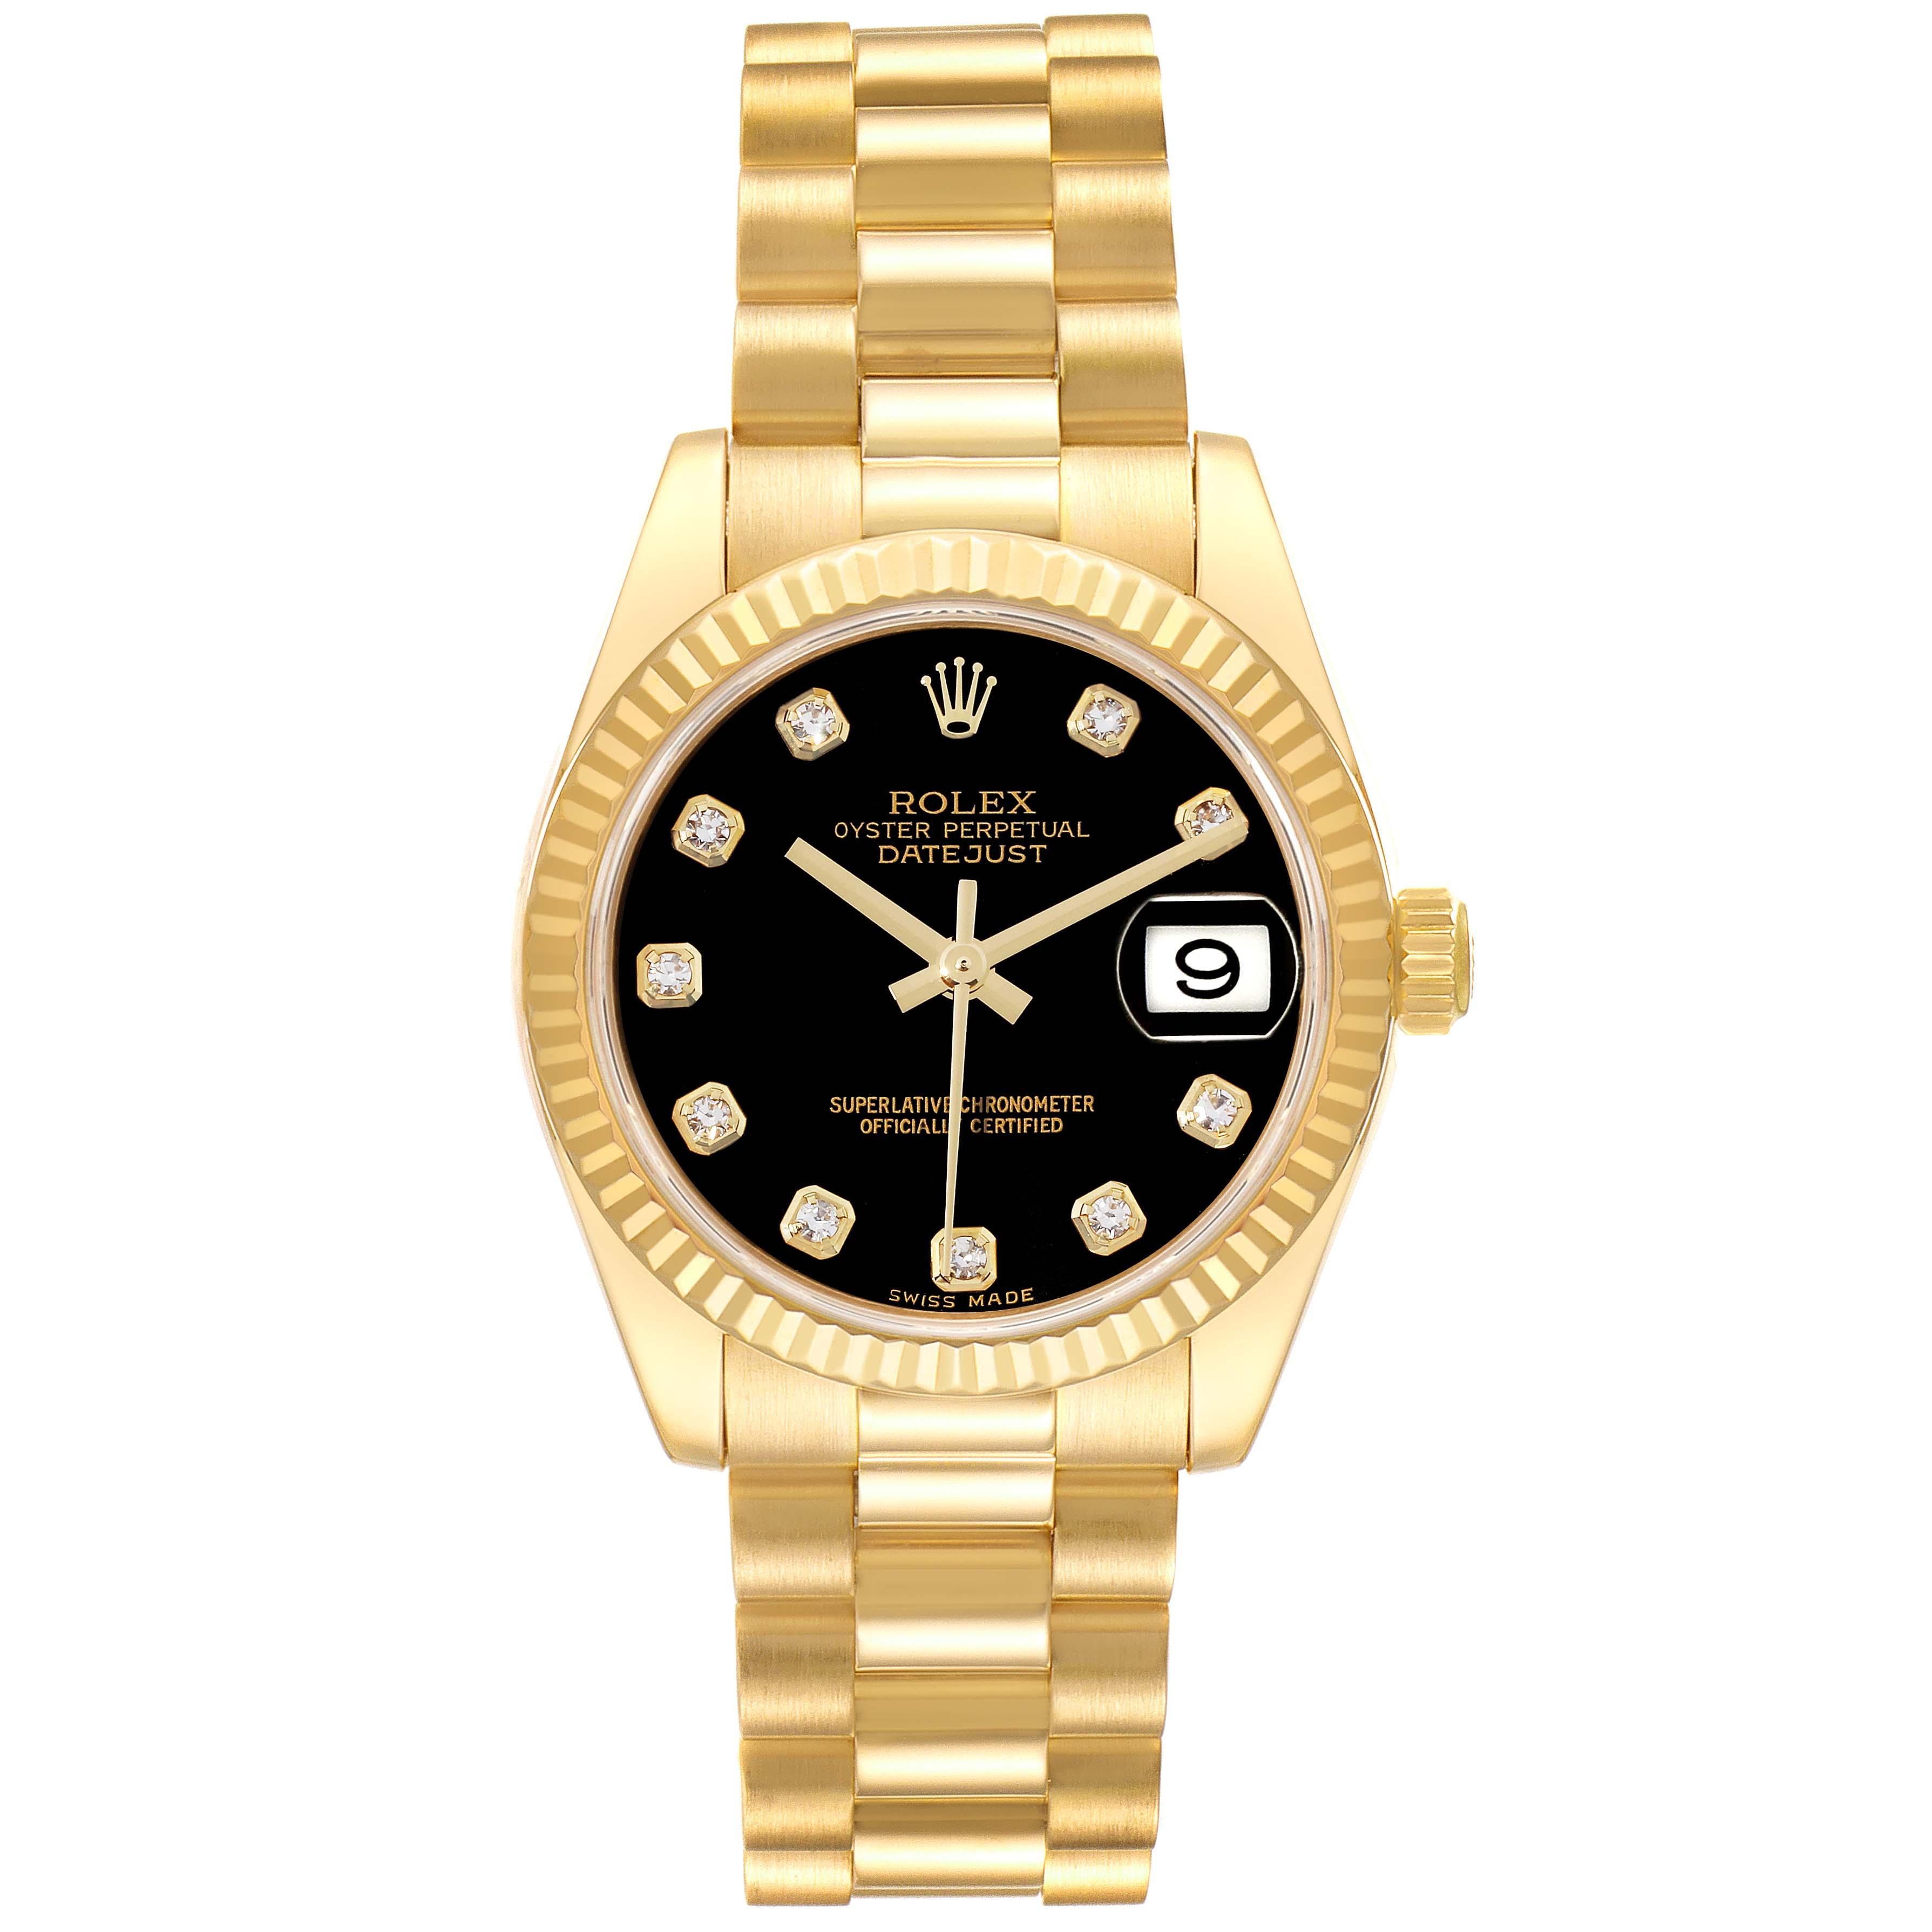 Rolex Datejust President Midsize Yellow Gold Diamond Dial Ladies Watch 178278. Officially certified chronometer automatic self-winding movement. 18k yellow gold oyster case 31.0 mm in diameter. Rolex logo on the crown. 18k yellow gold fluted bezel.